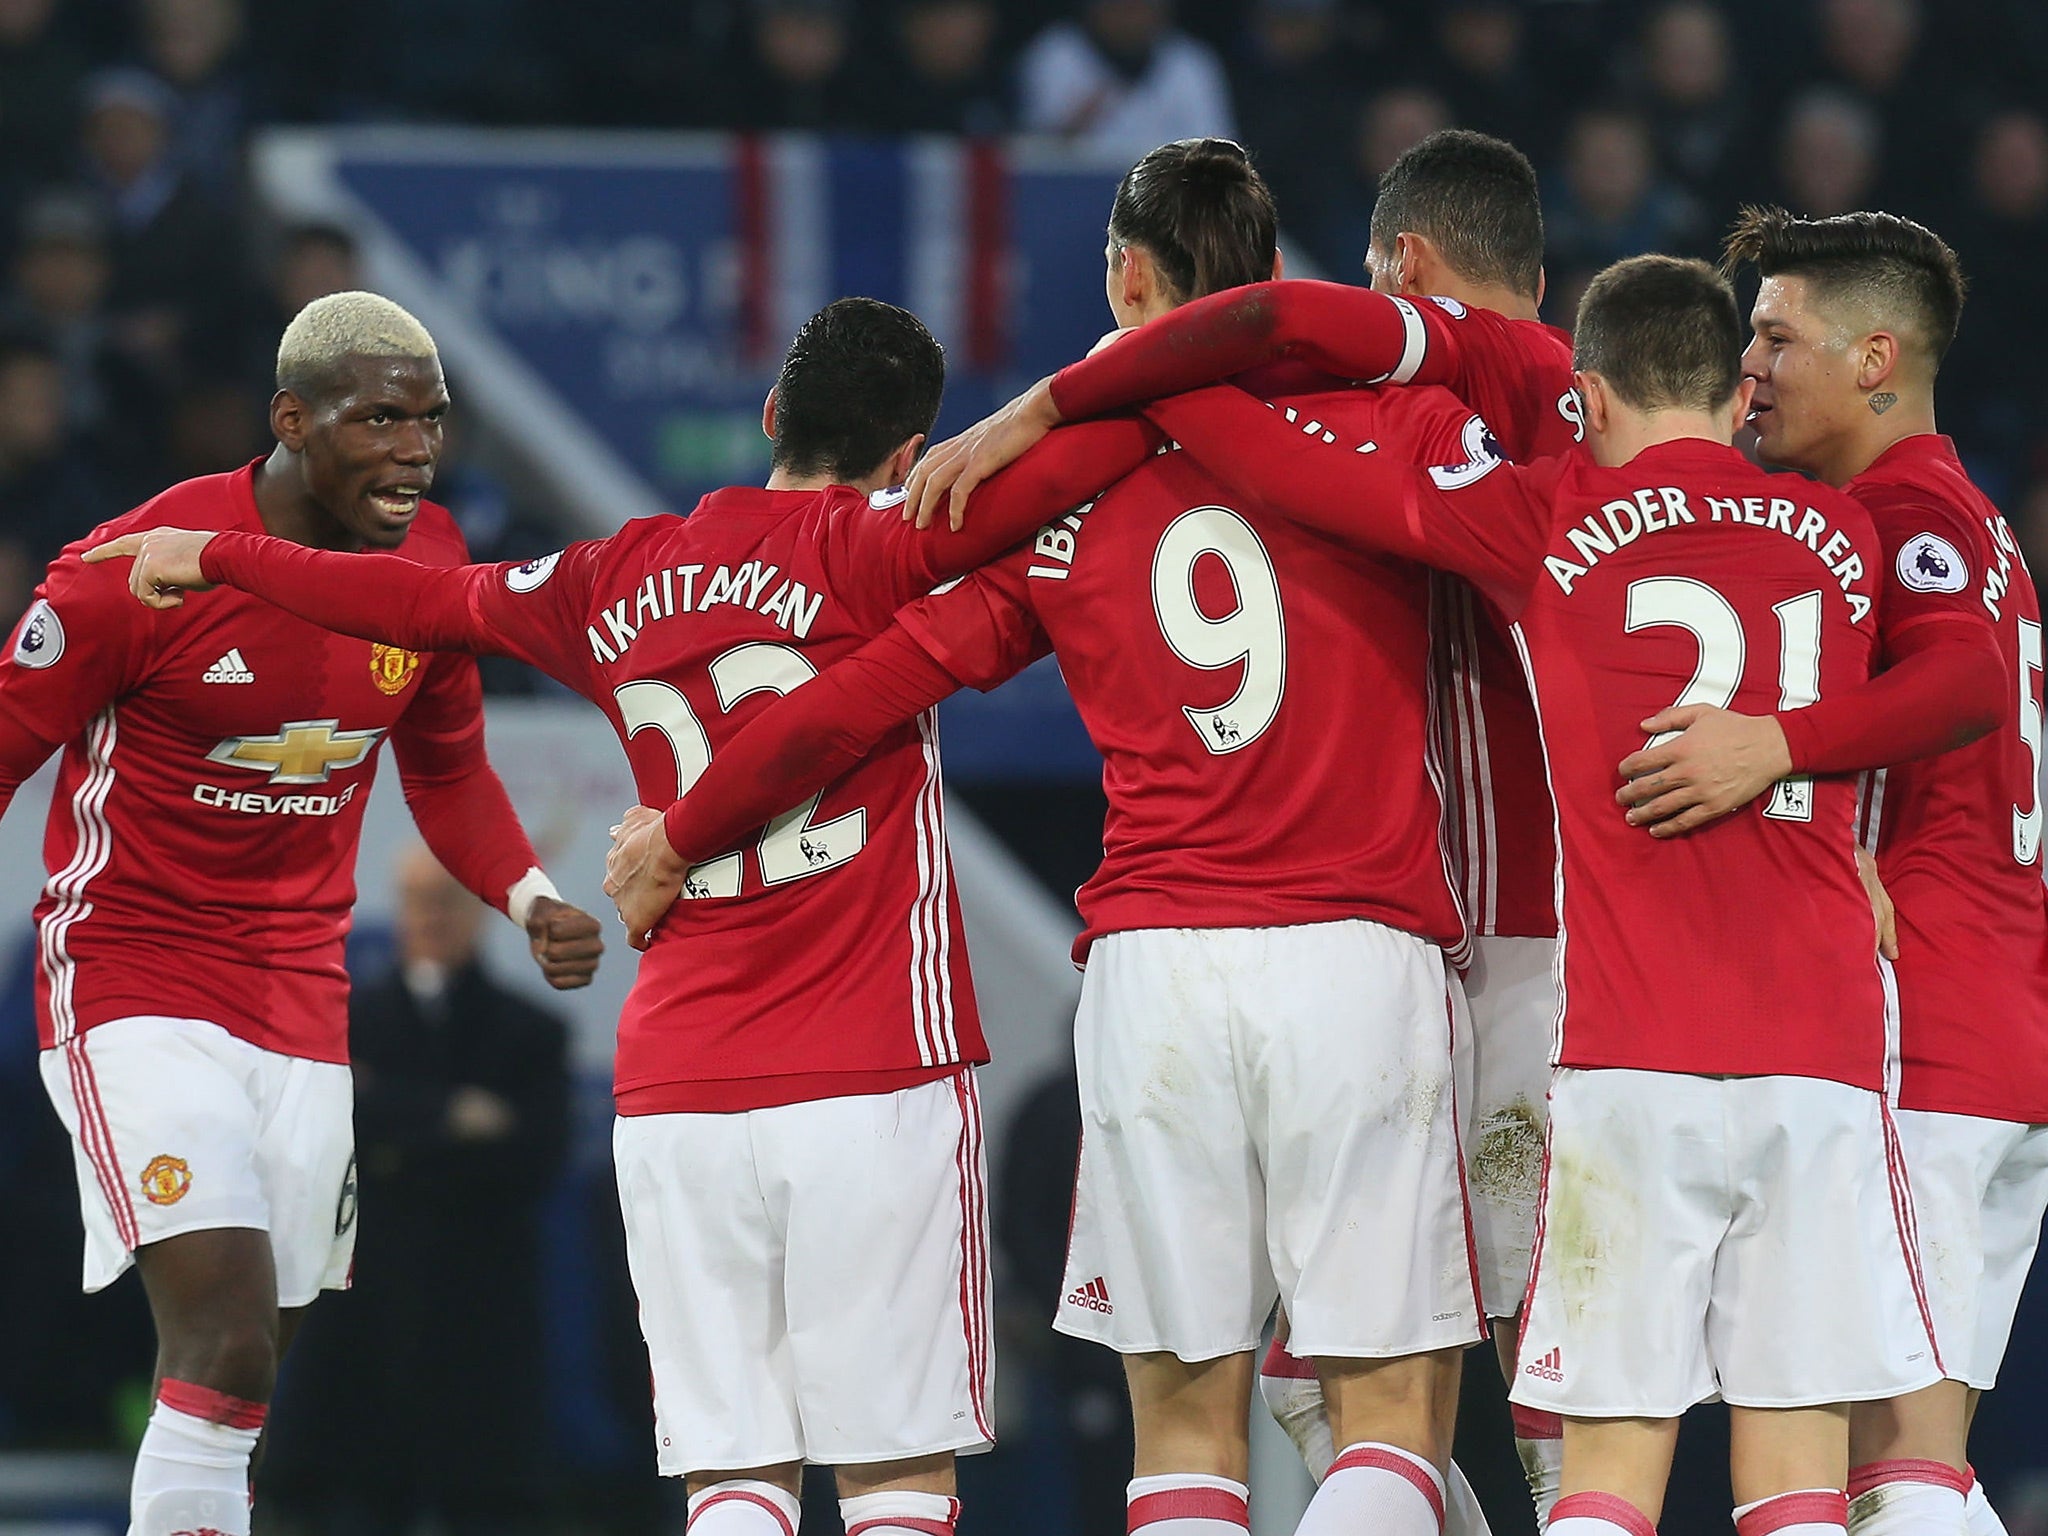 Manchester United's side is littered with attacking talent, but goals have been relatively hard to come by